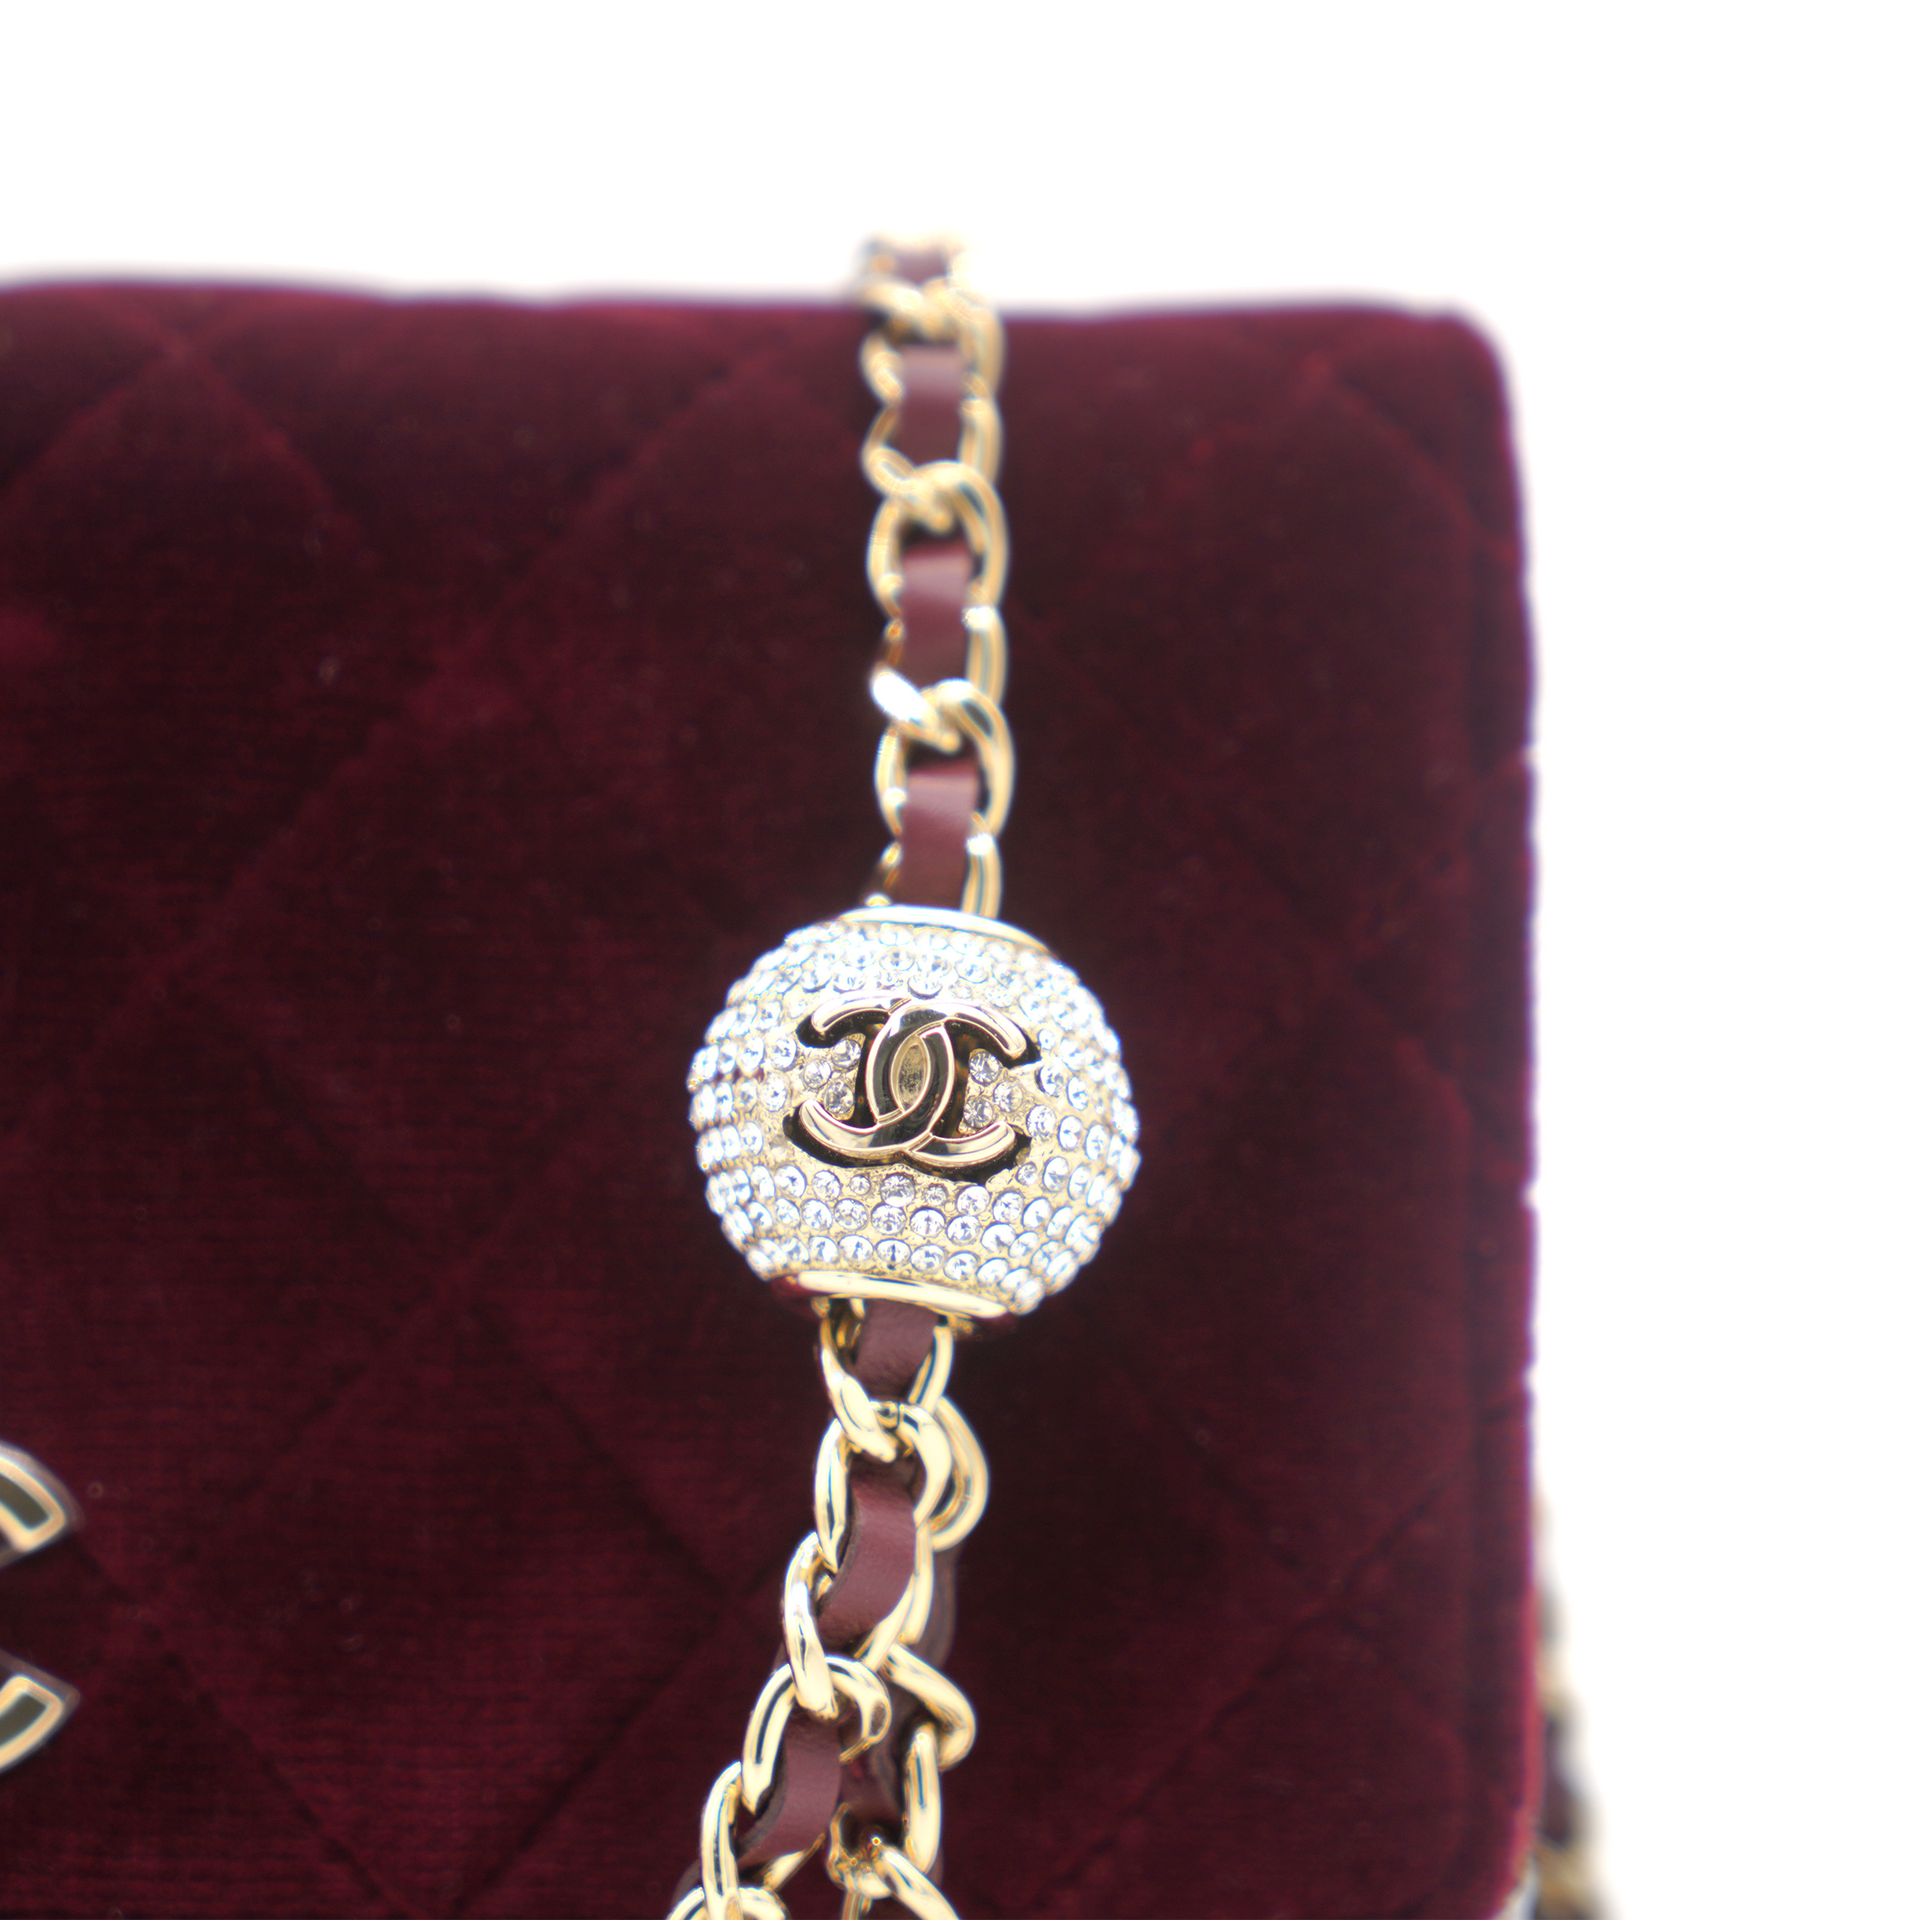 Velvet Quilted Pearl Crush Wallet On Chain WOC Burgundy